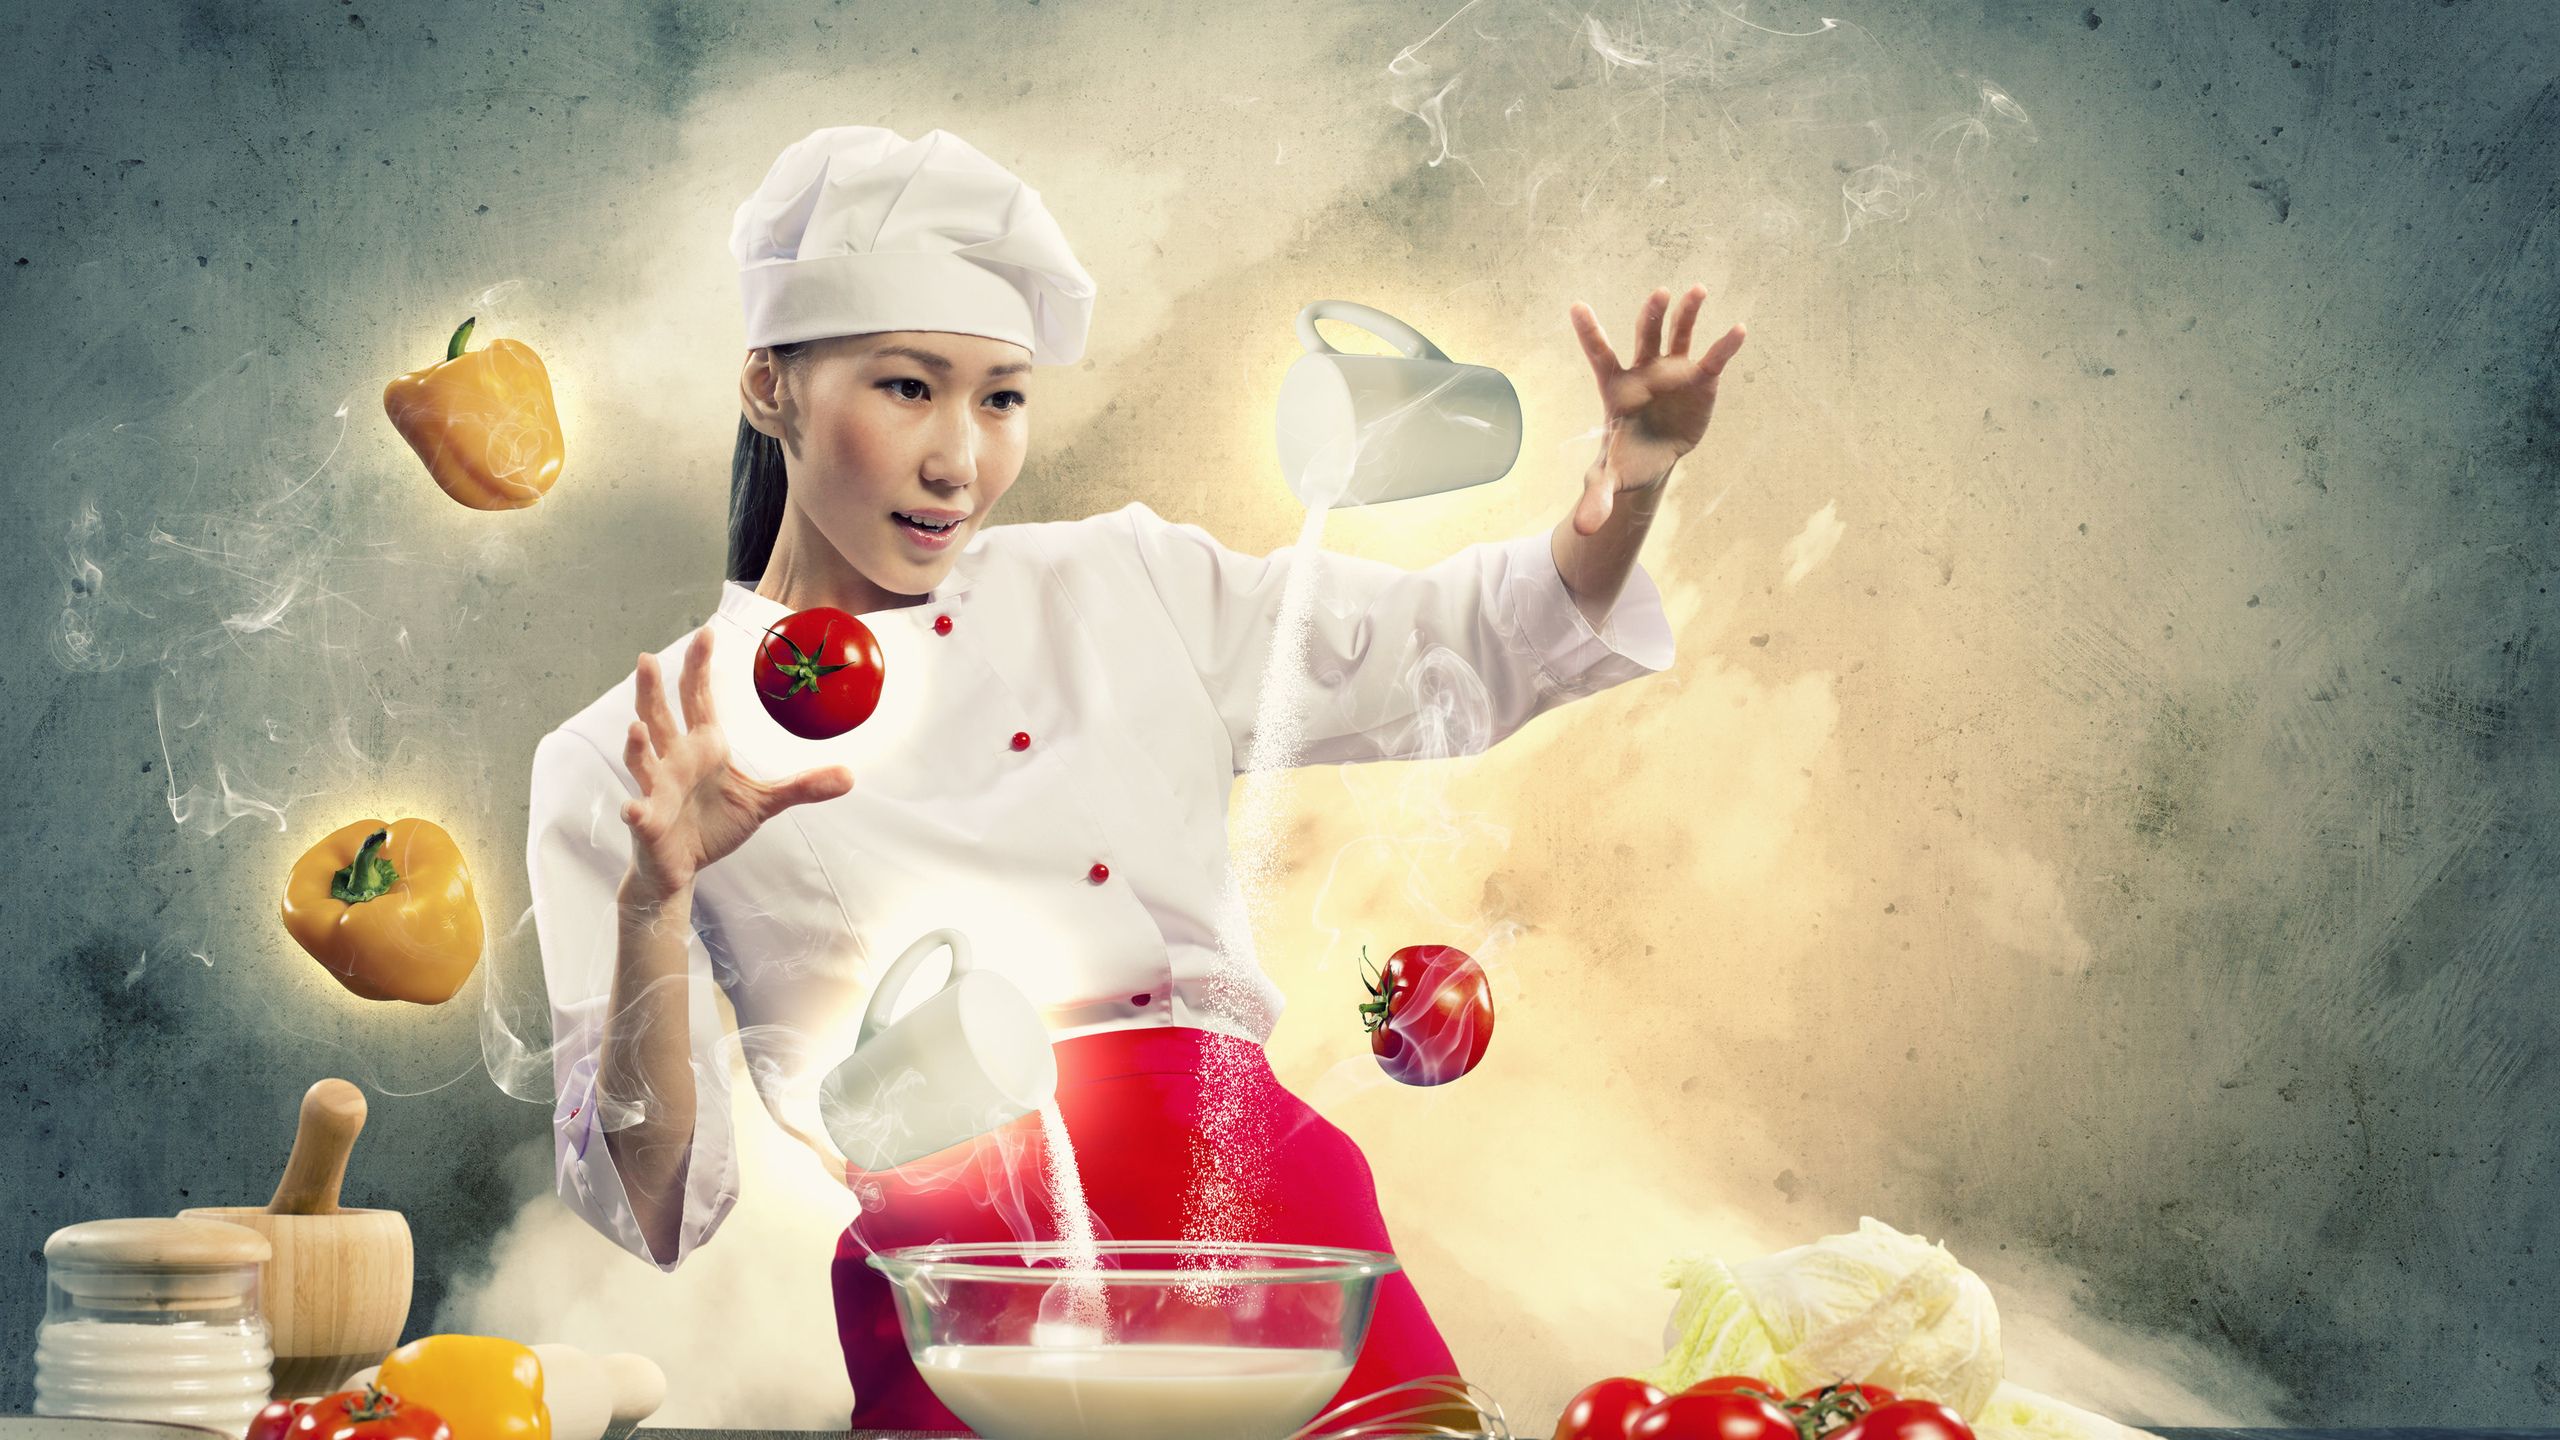 Cooking Background Free Download